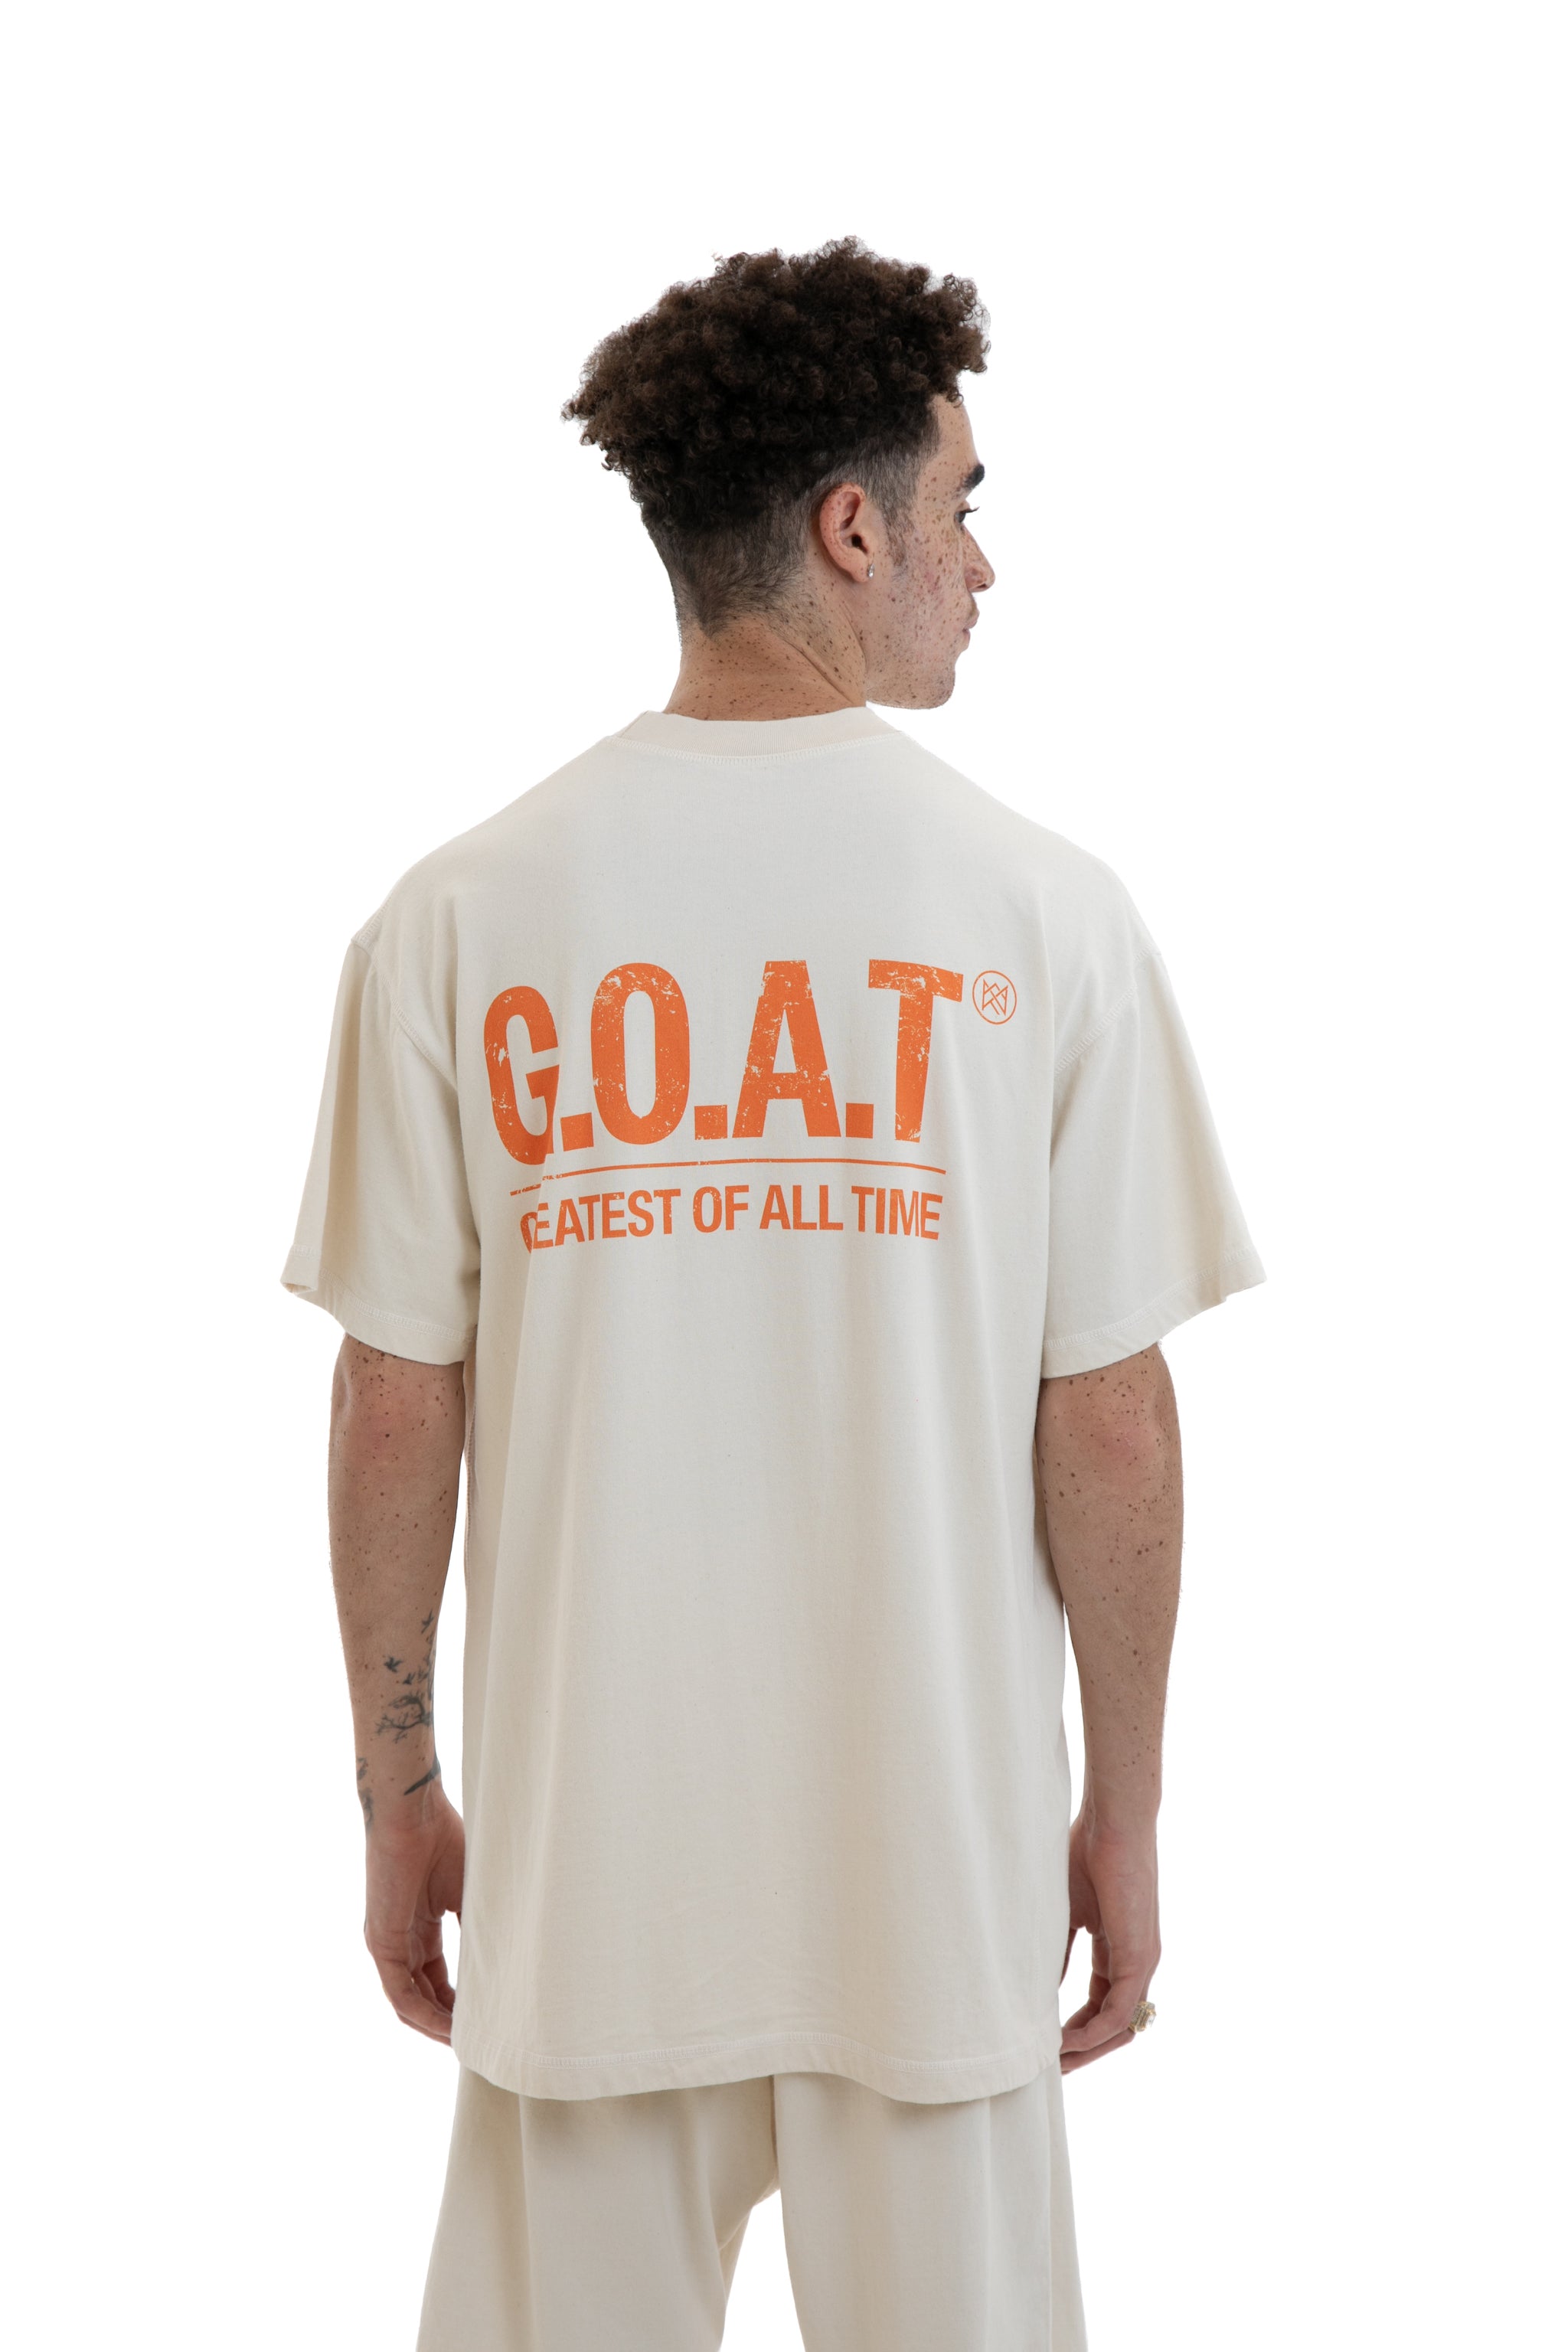 GOAT Heir Oversized Tee Off White - Real Artistic People